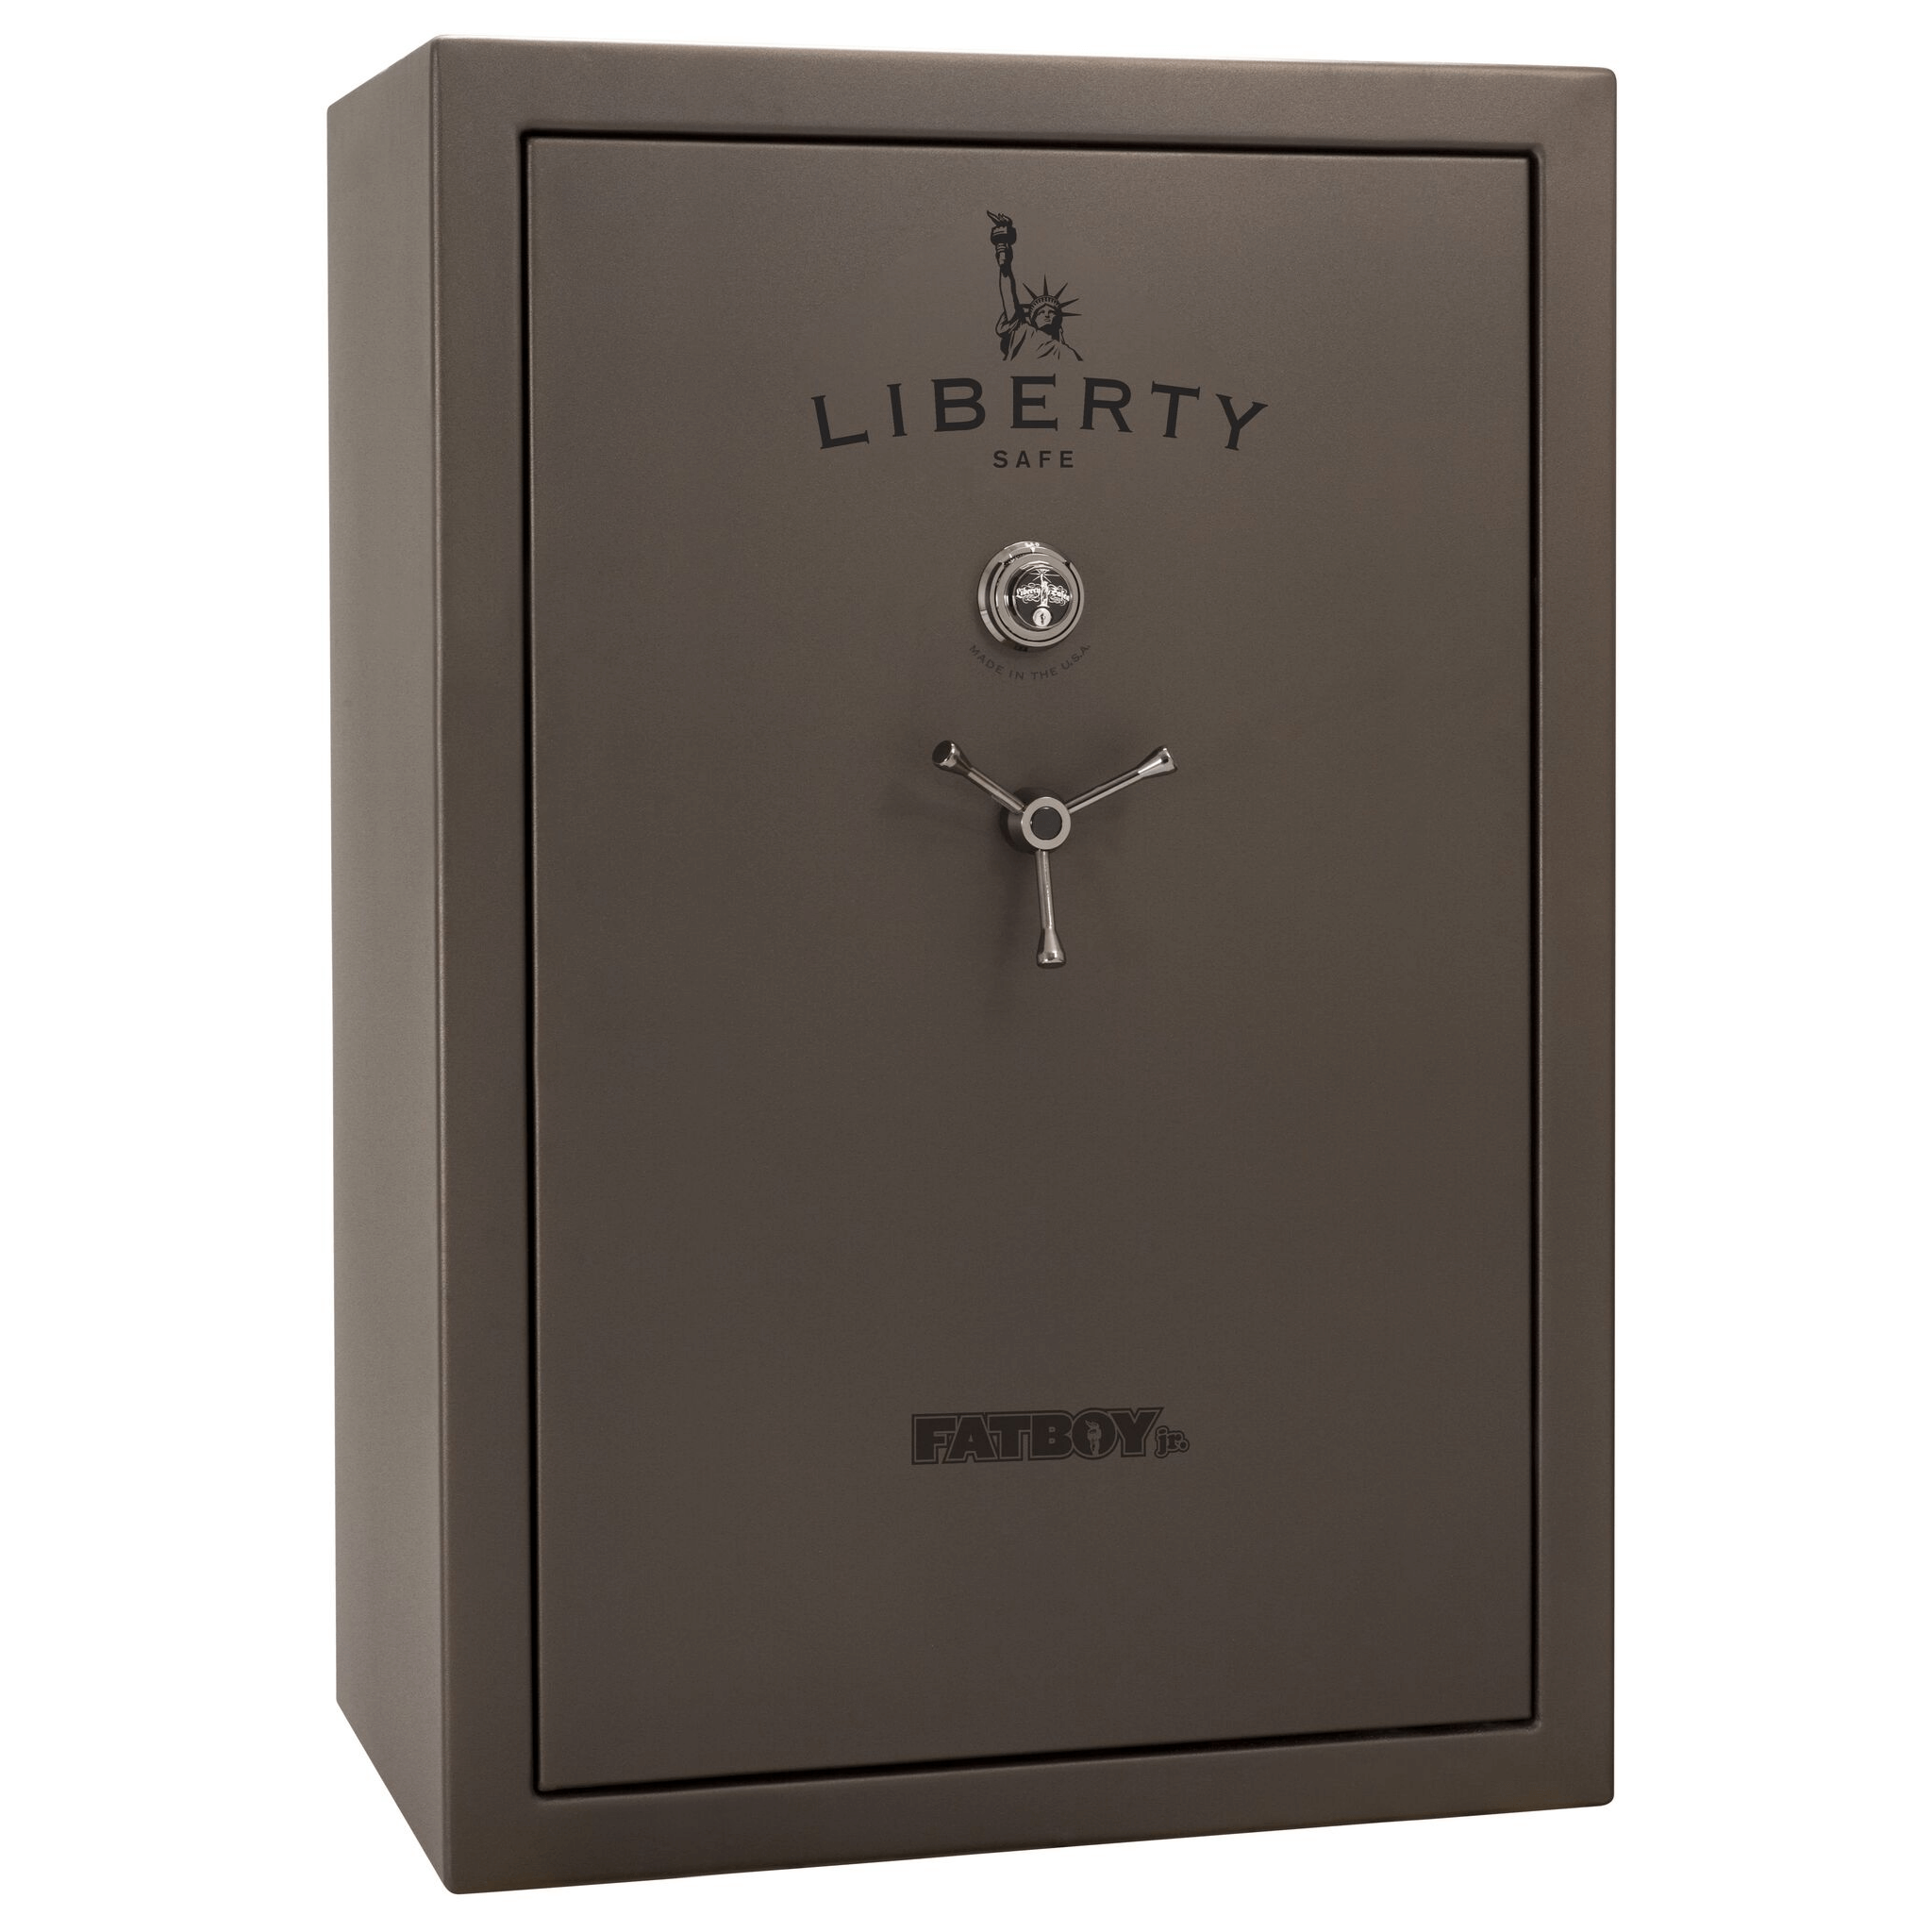 Fatboy Jr. Series | Level 3 Security | 75 Minute Fire Protection | 48XT | Dimensions: 60.5"(H) x 42"(W) x 25"(D) | Extreme 6 in 1 Flex Interior | Bronze Textured | Electronic Lock, photo 27